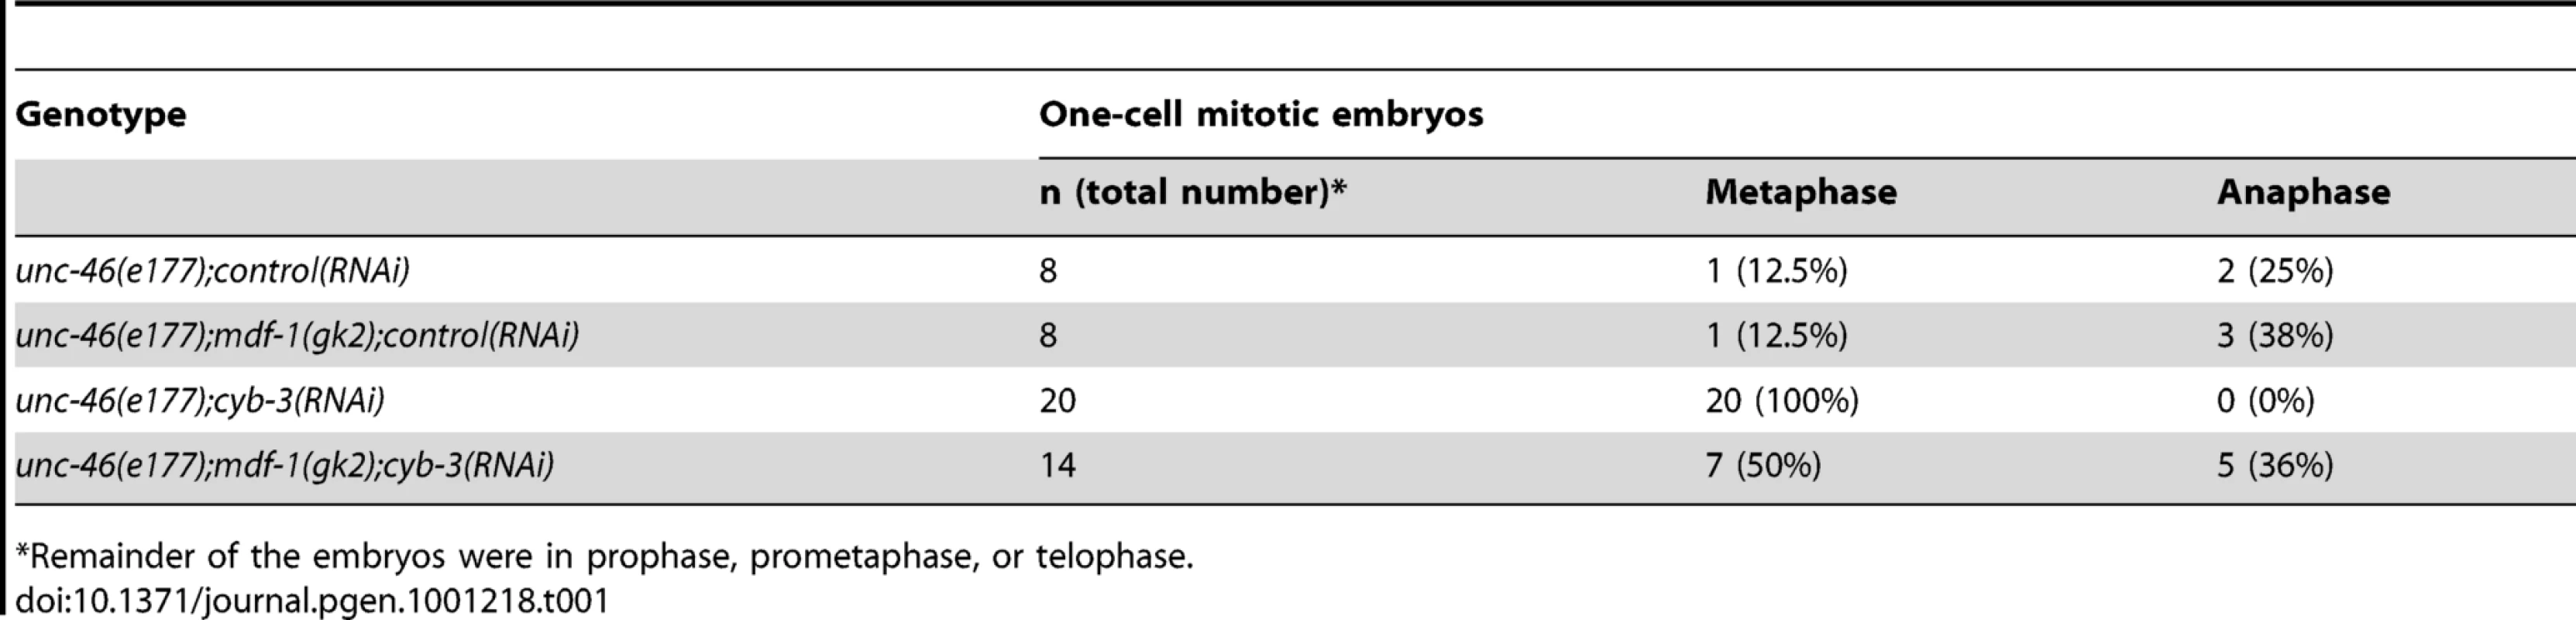 Number of metaphase and anaphase embryos in CYB-3-depleted <i>mdf-1(gk2)</i> embryos.